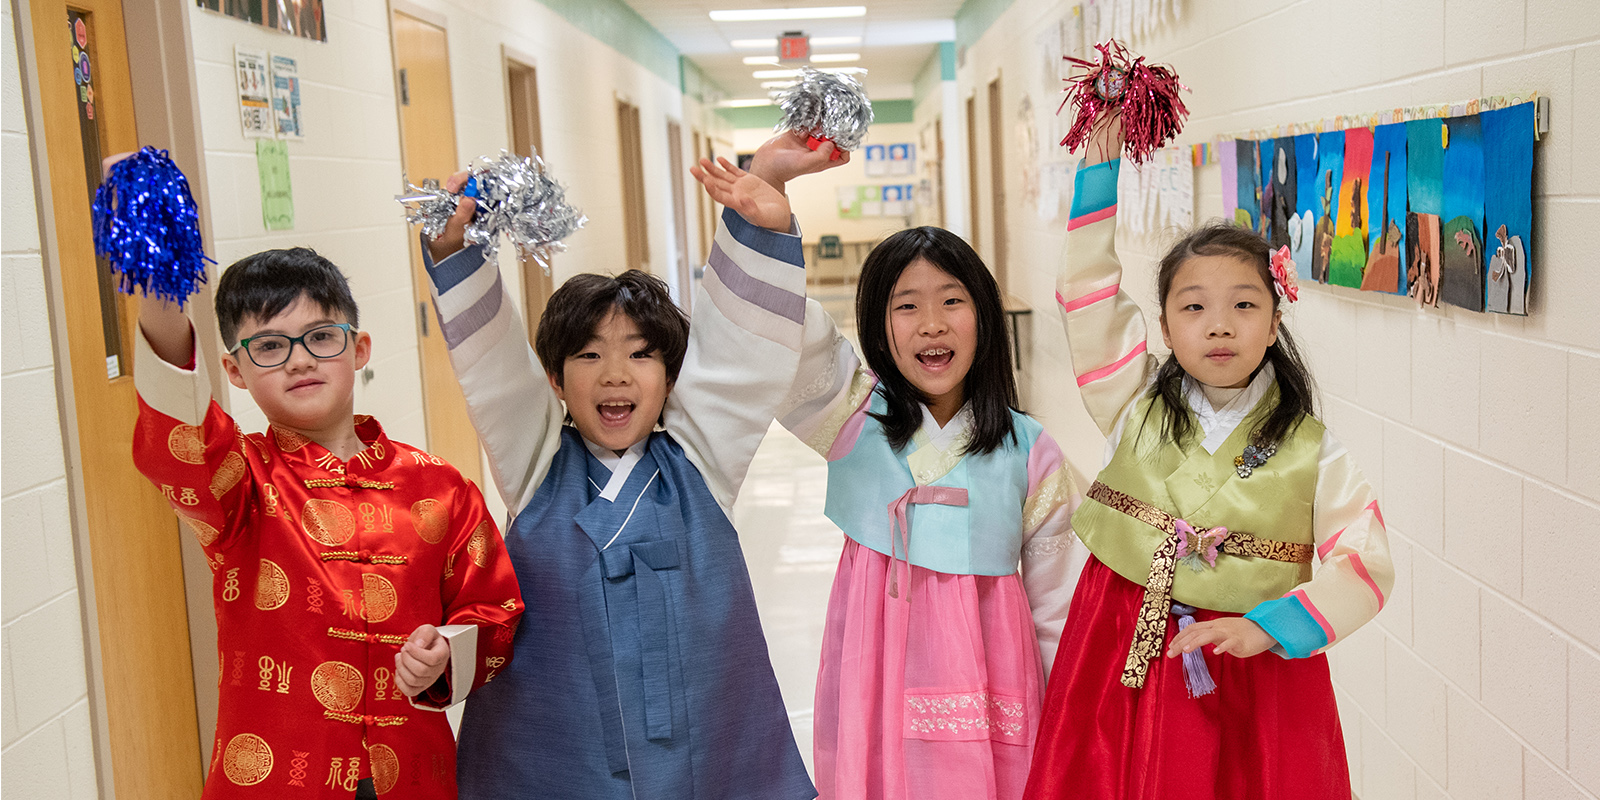 Powell students from Kindergarten to sixth grade join in the first-ever schoolwide Lunar New Year celebration.